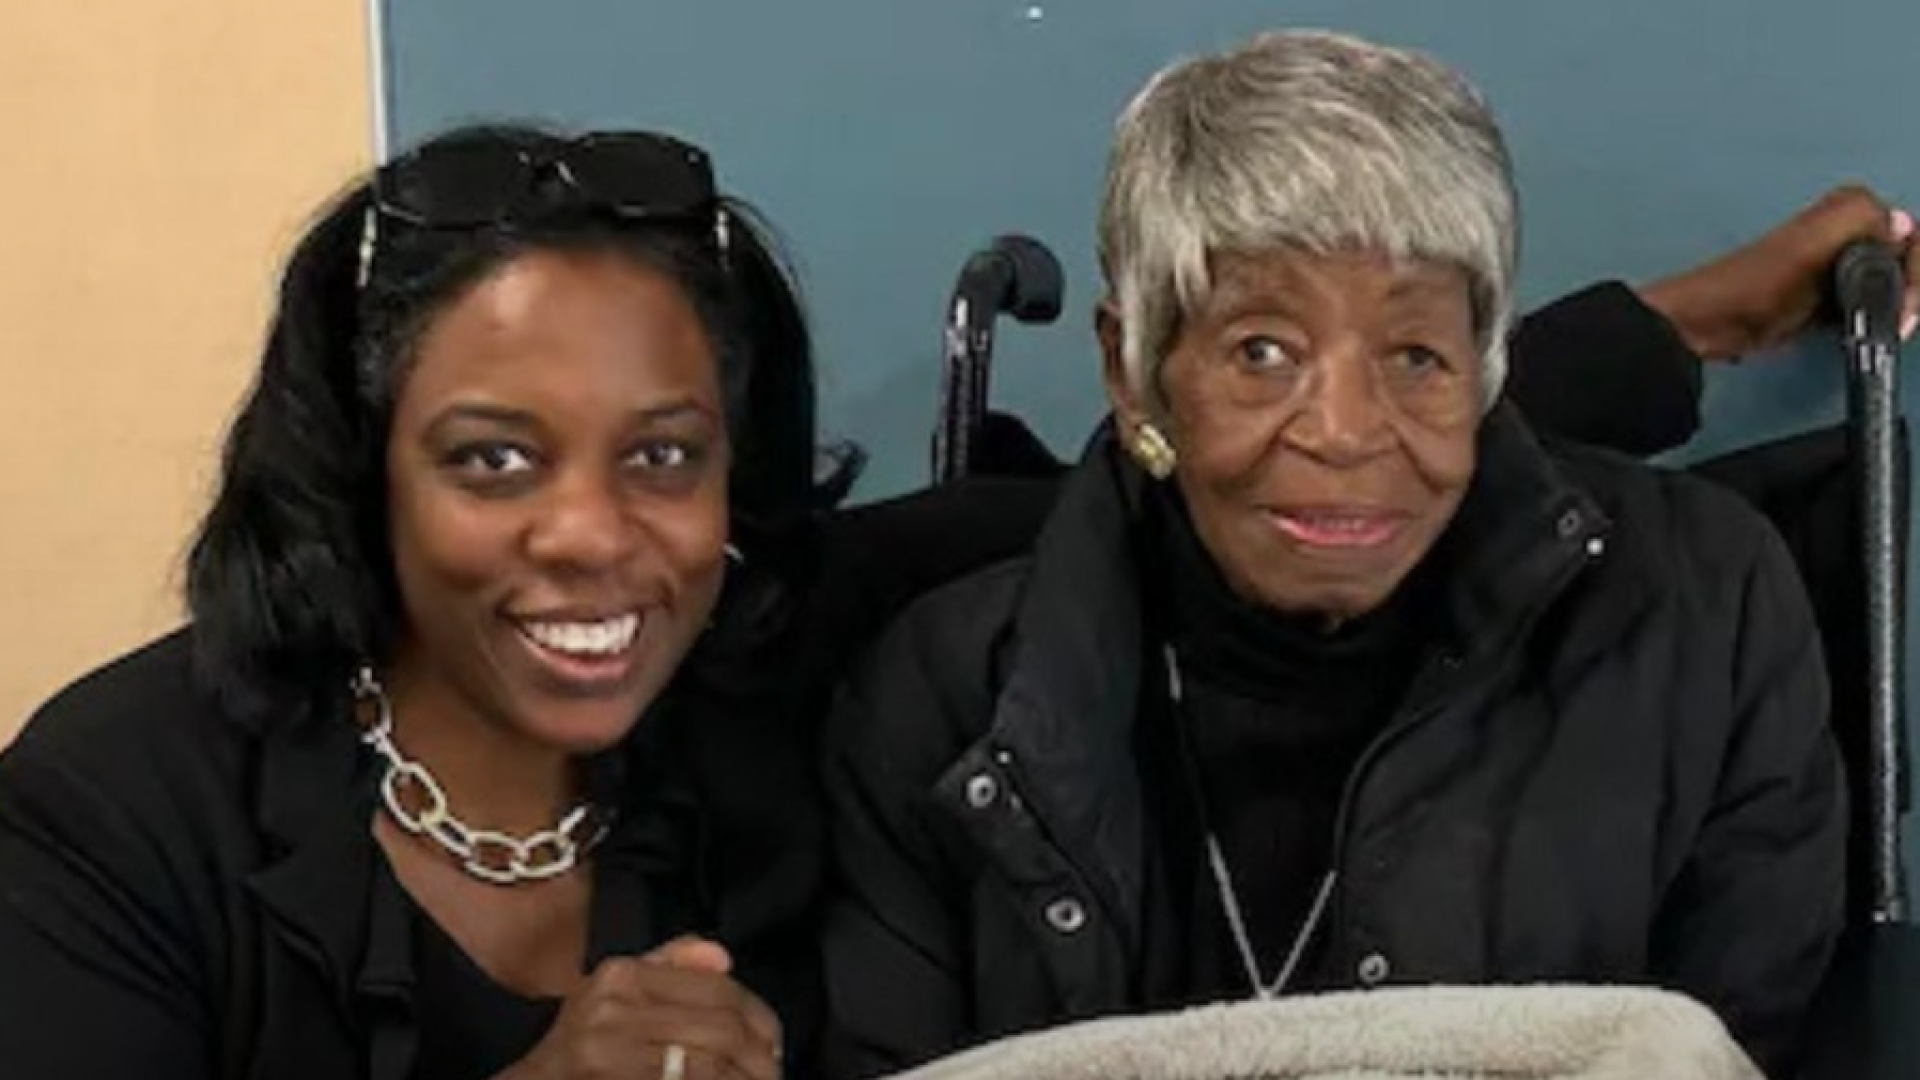 101-Year-Old Woman Returned To School And Will Graduate College With Her Granddaughter This Year